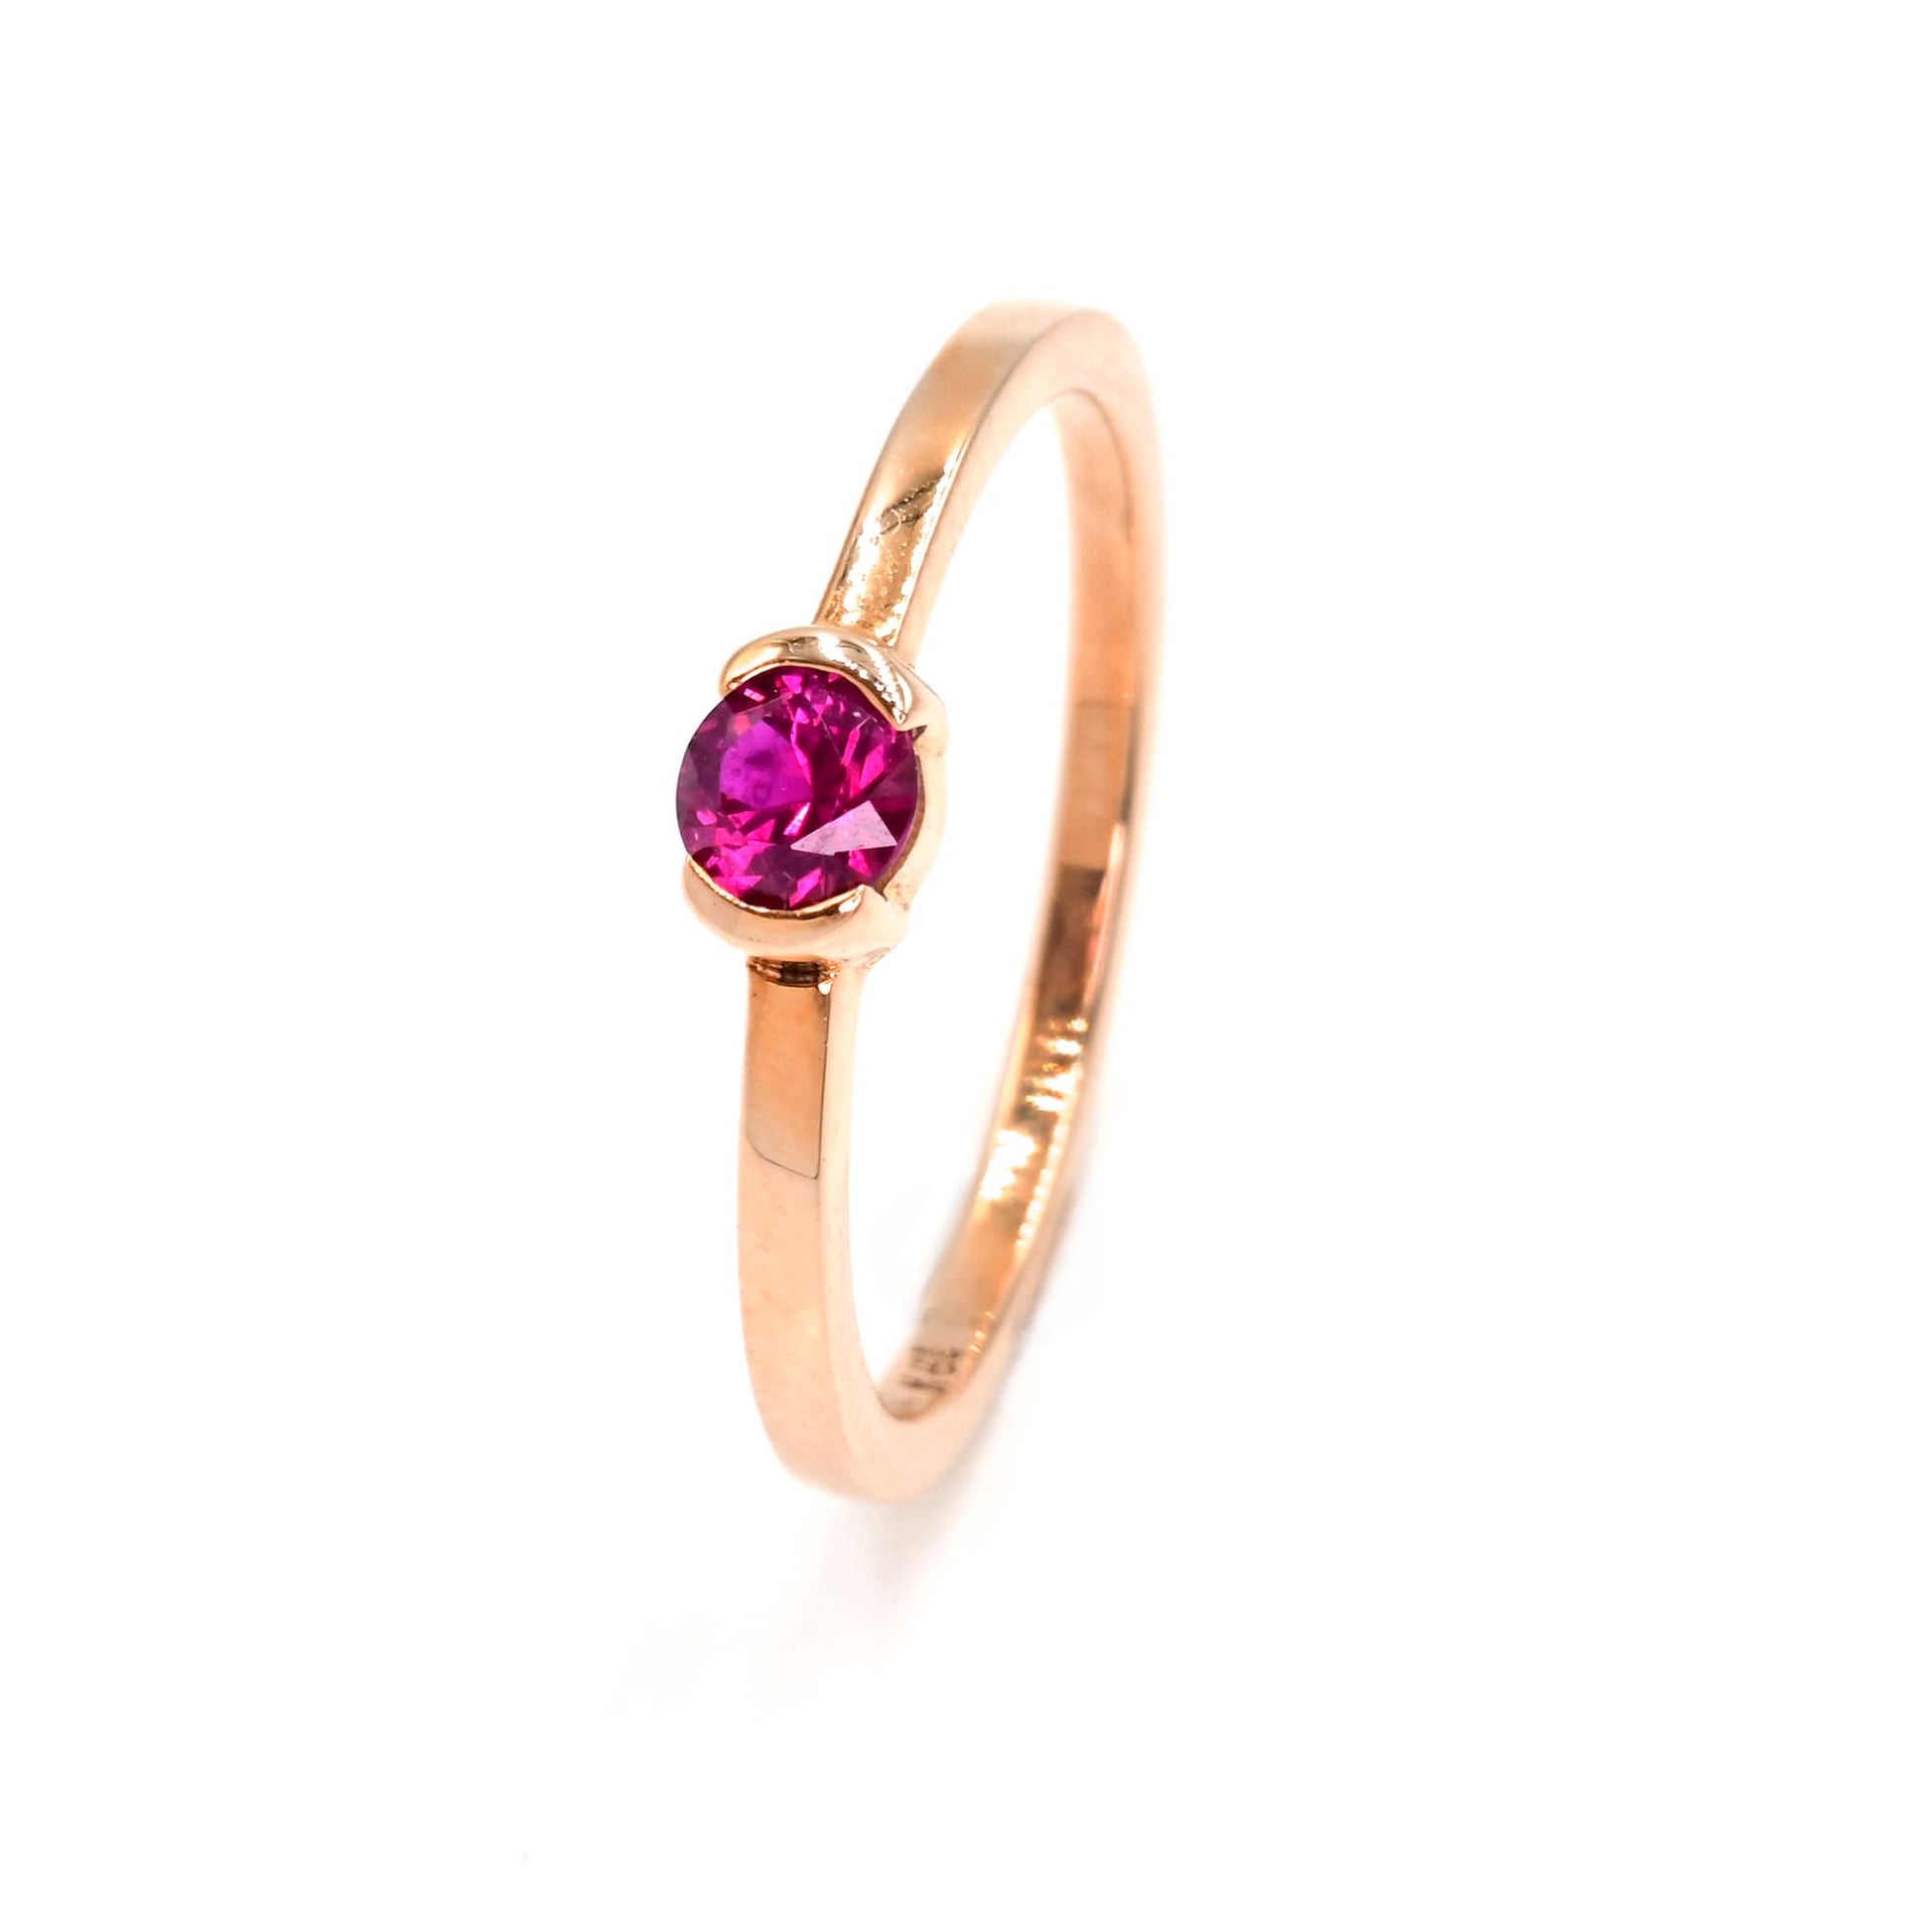 Half-bezel ruby ring in rose gold is a head turner. Handmade jewelry from Shiraz Jewelry in Chiang Mai, Thailand